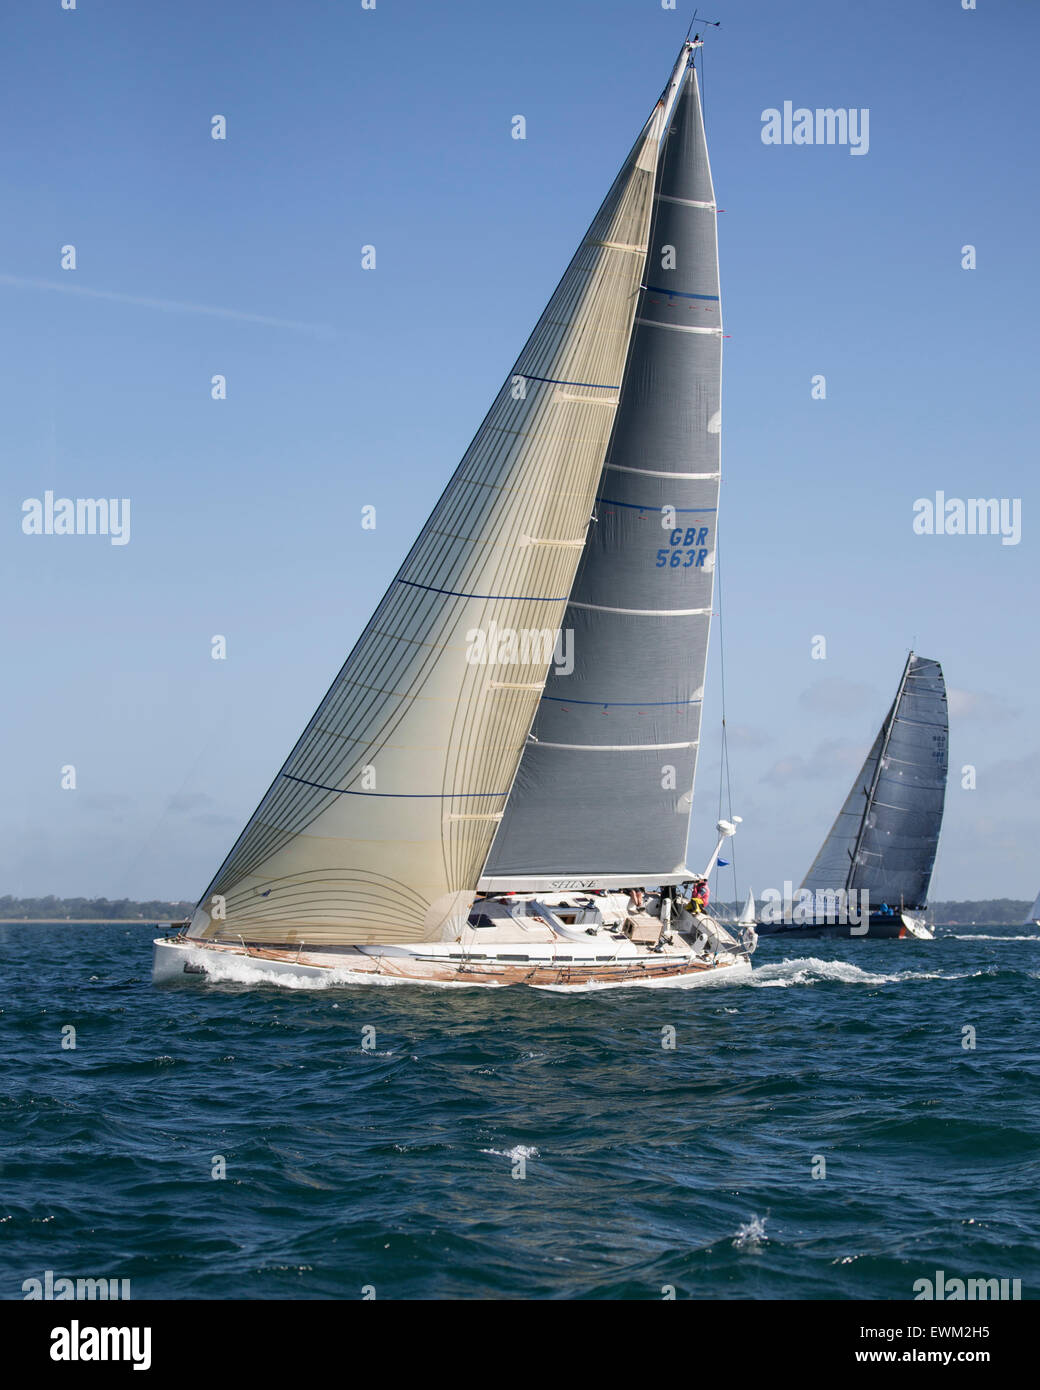 UK. 27th June, 2015. Grand Soleil 56 yacht 'Shine' (nearer) owned by Giles Redpath, and Imoca 60 'J P Morgan Asset Management Rosalba (further) taking part in the 2015 Round the Island Race Credit:  Niall Ferguson/Alamy Live News Stock Photo